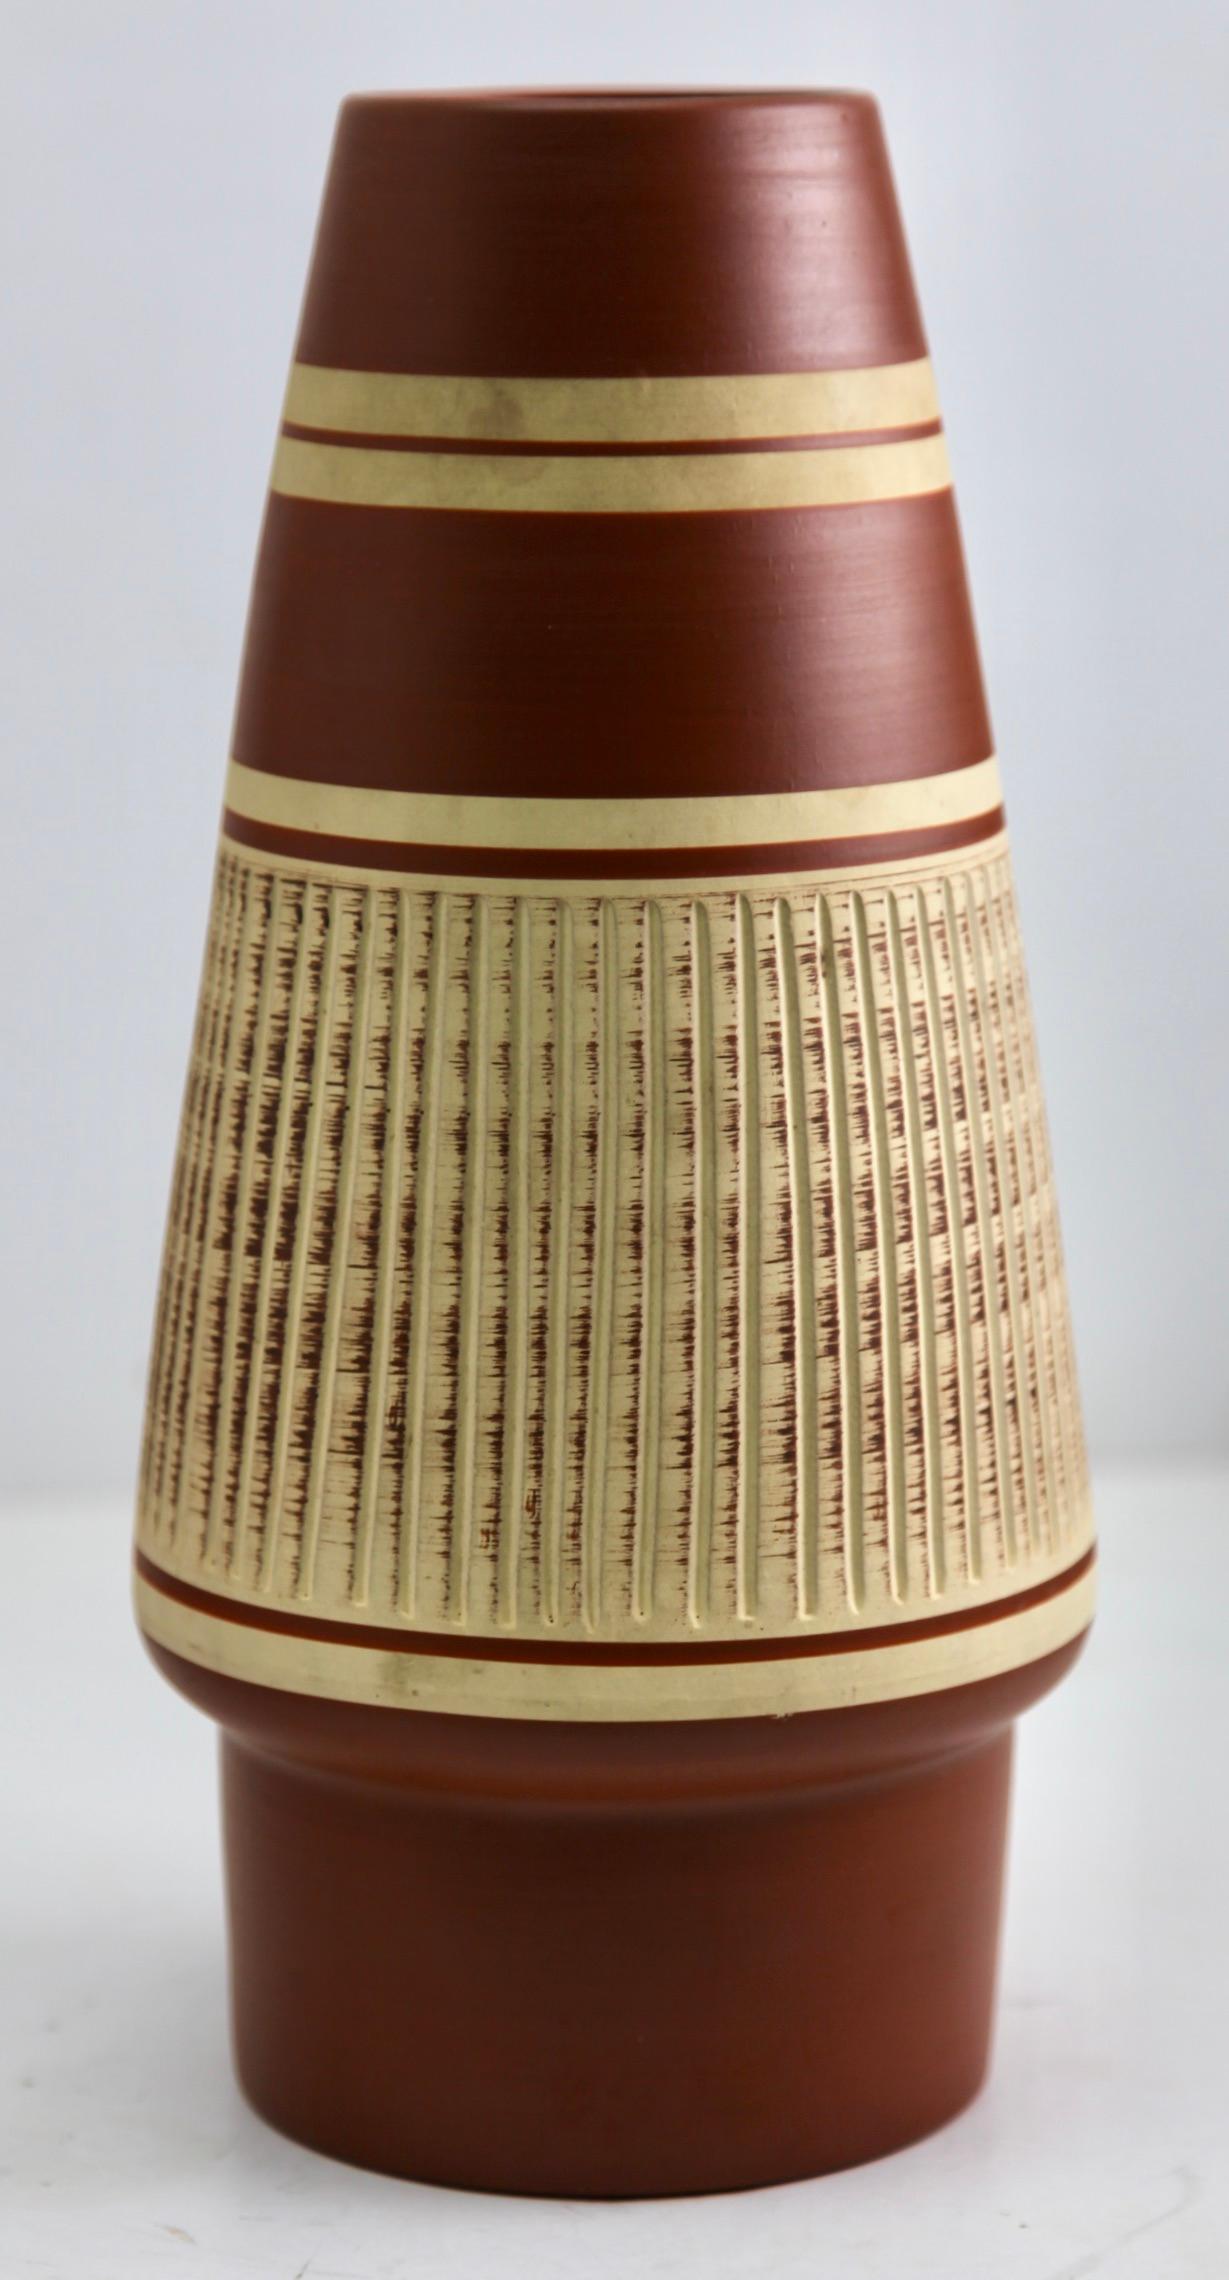 These original vintage vase was produced in the 1970s in Germany. It is made of ceramic pottery.
The bottom are marked the vase series number 353-30
Straightforward and minimalistic design of the 1960s design era. 
Super rare in this coloration.